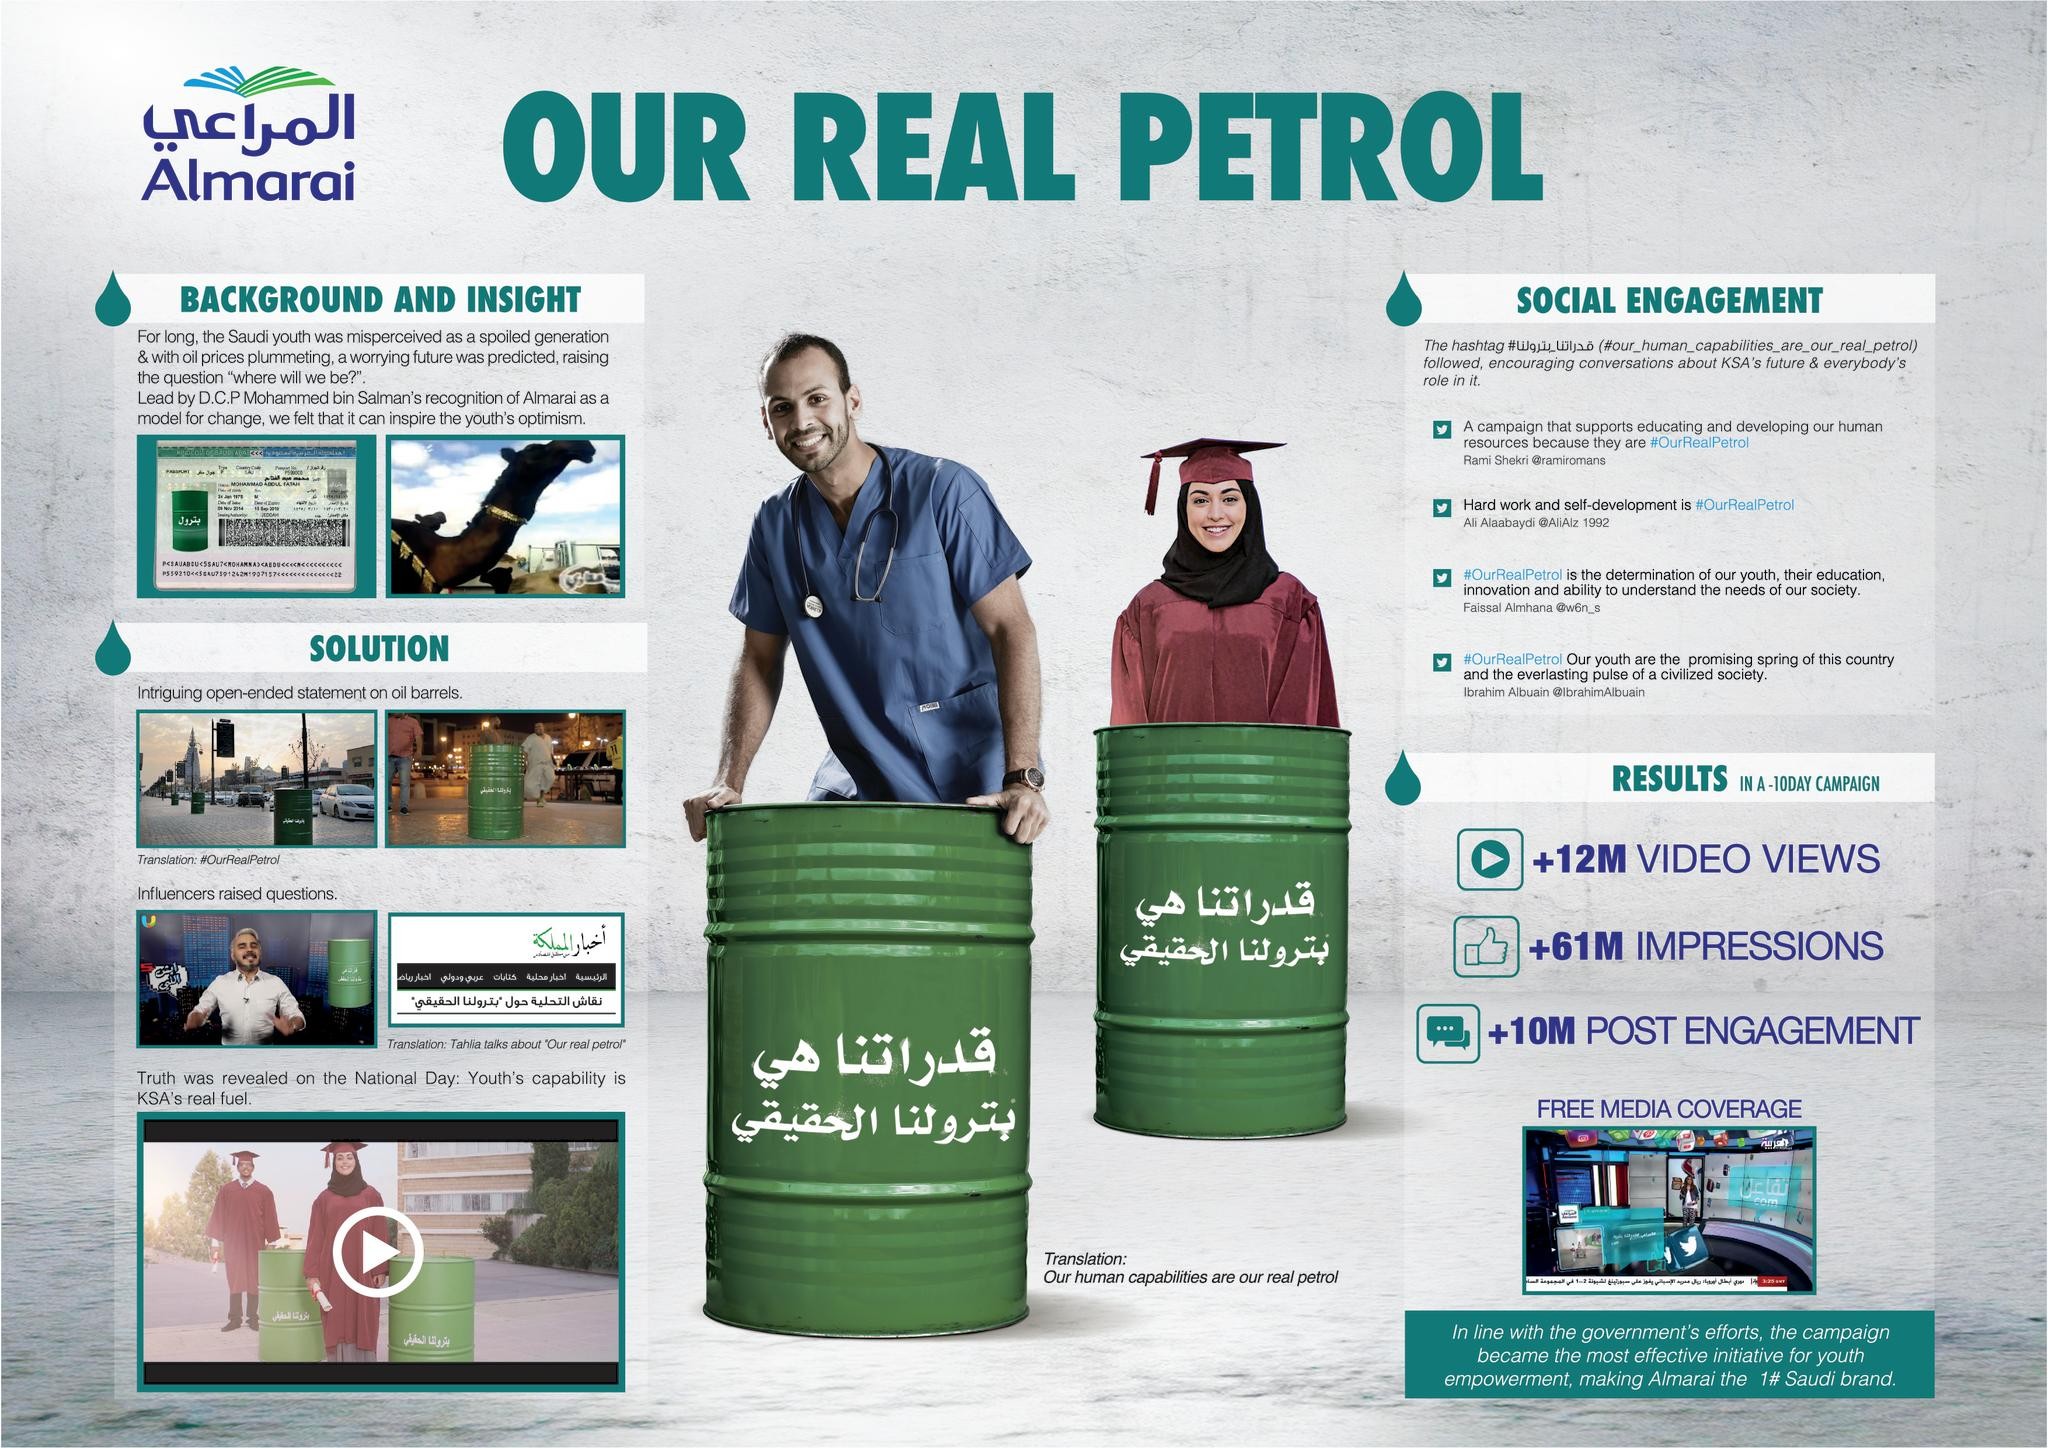 Our Real Petrol